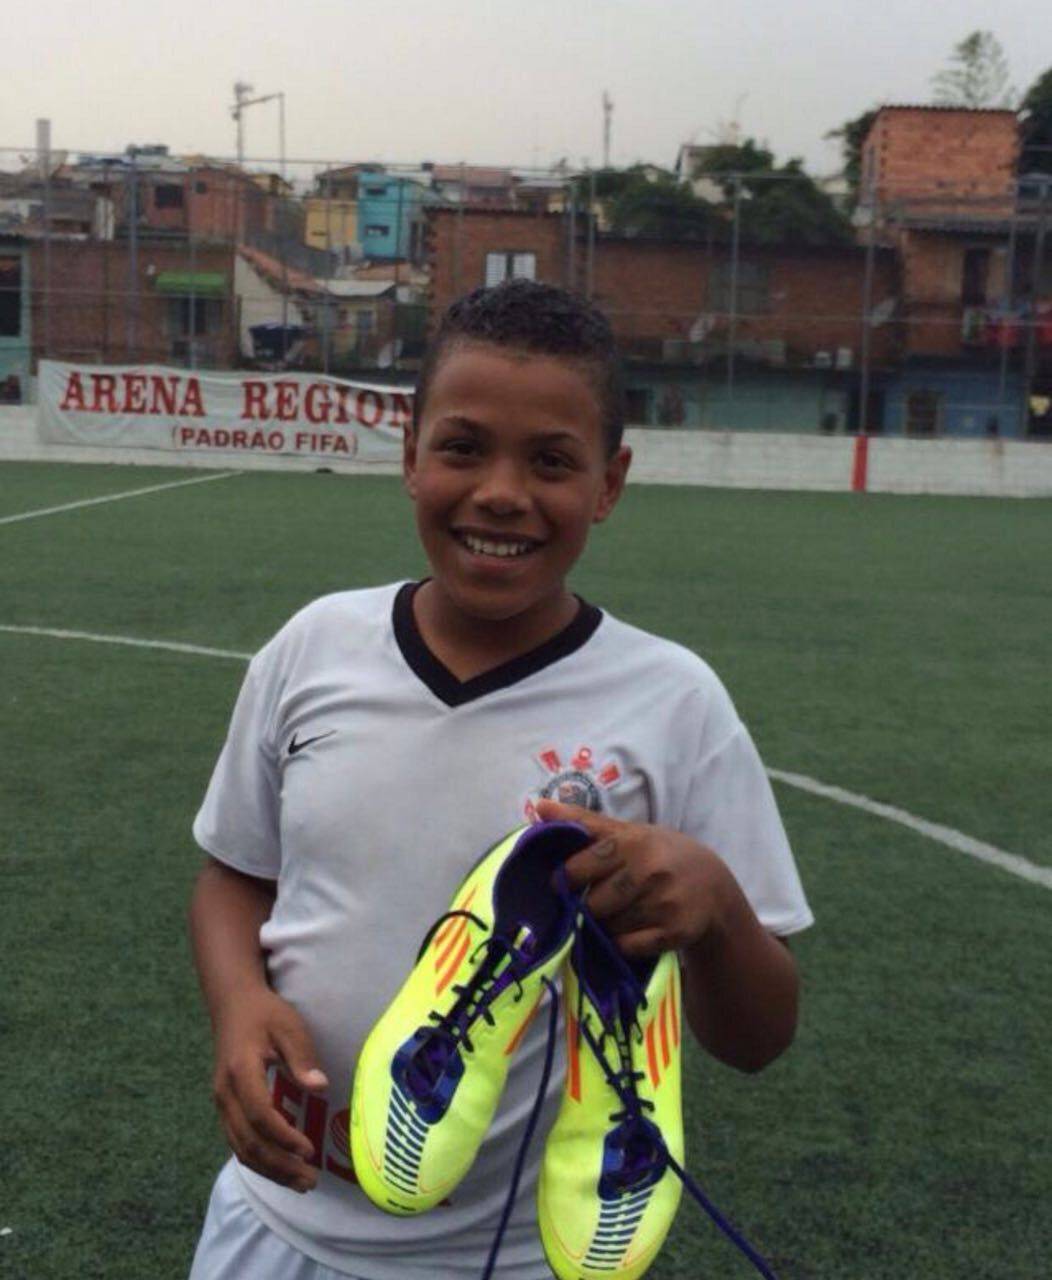 Our “soccer dreamer” delighted with his gift!